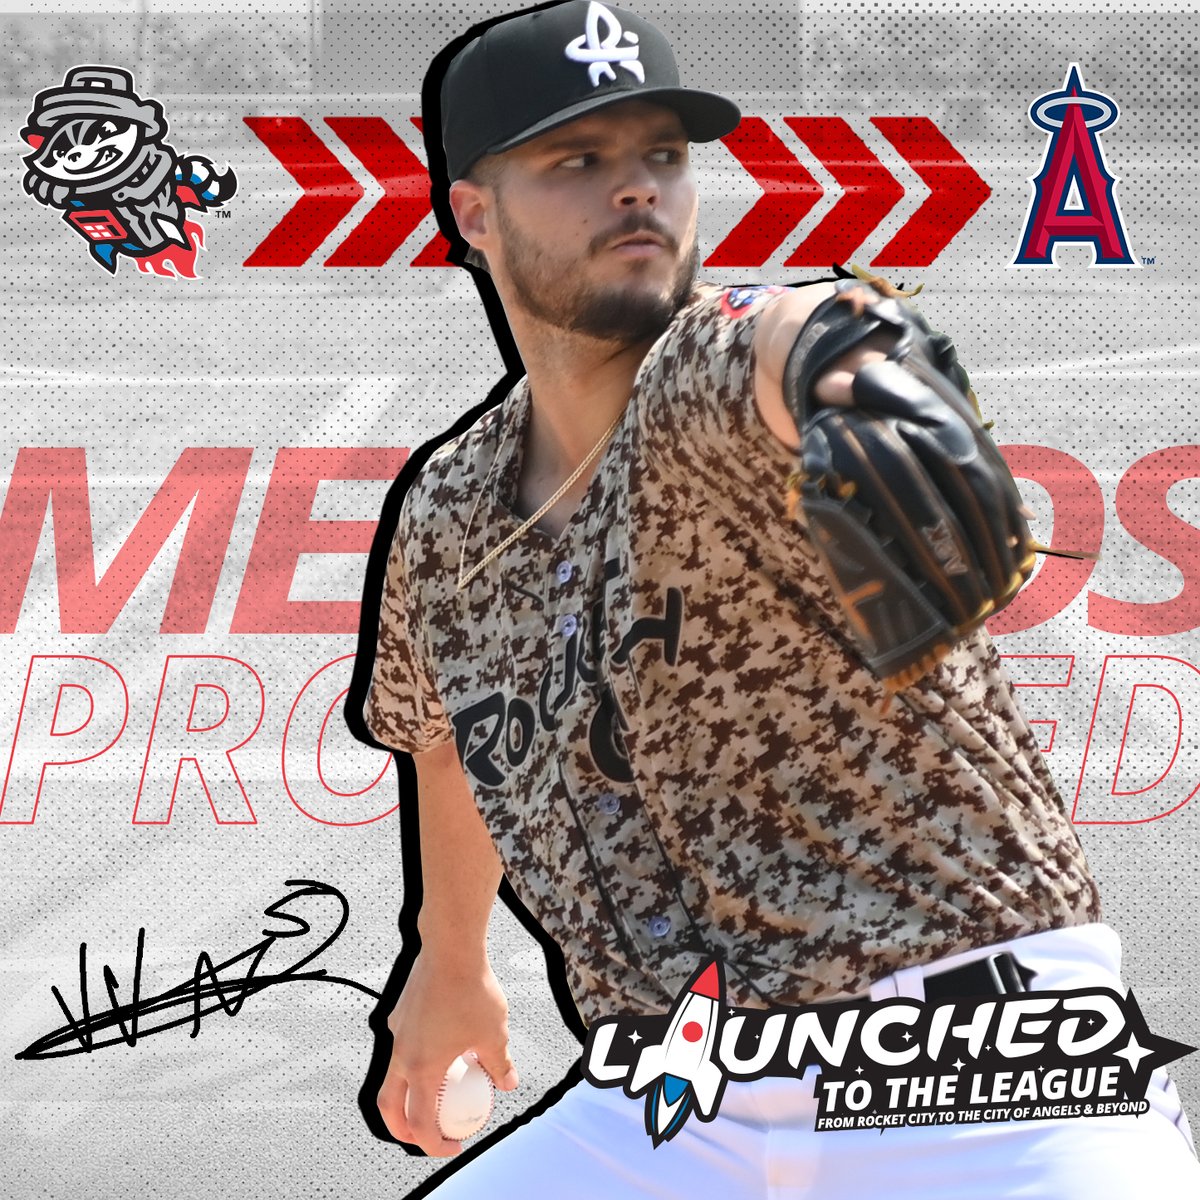 MEDEROS TO THE MAJORS! 🚀 The @Angels have selected the contract of Victor Mederos, who will become the 21st Trash Pandas player to make his debut with Los Angeles! #GoHalos #LaunchedToTheLeague